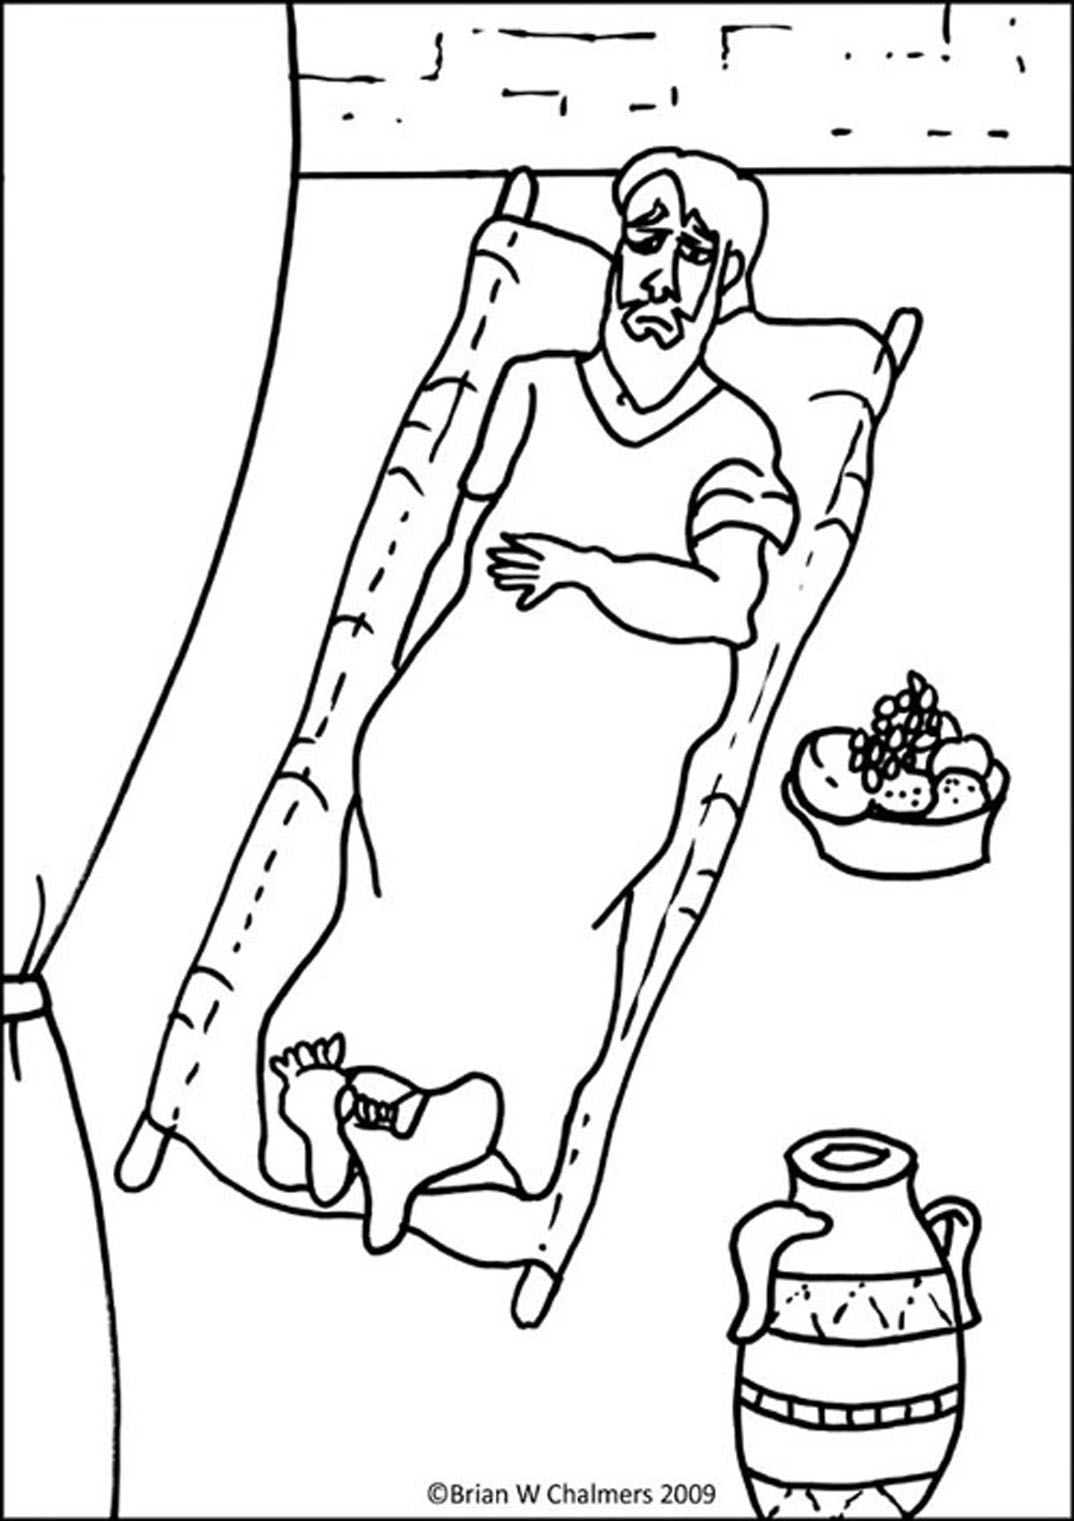 Bible Coloring Pages Men - Coloring Pages For All Ages